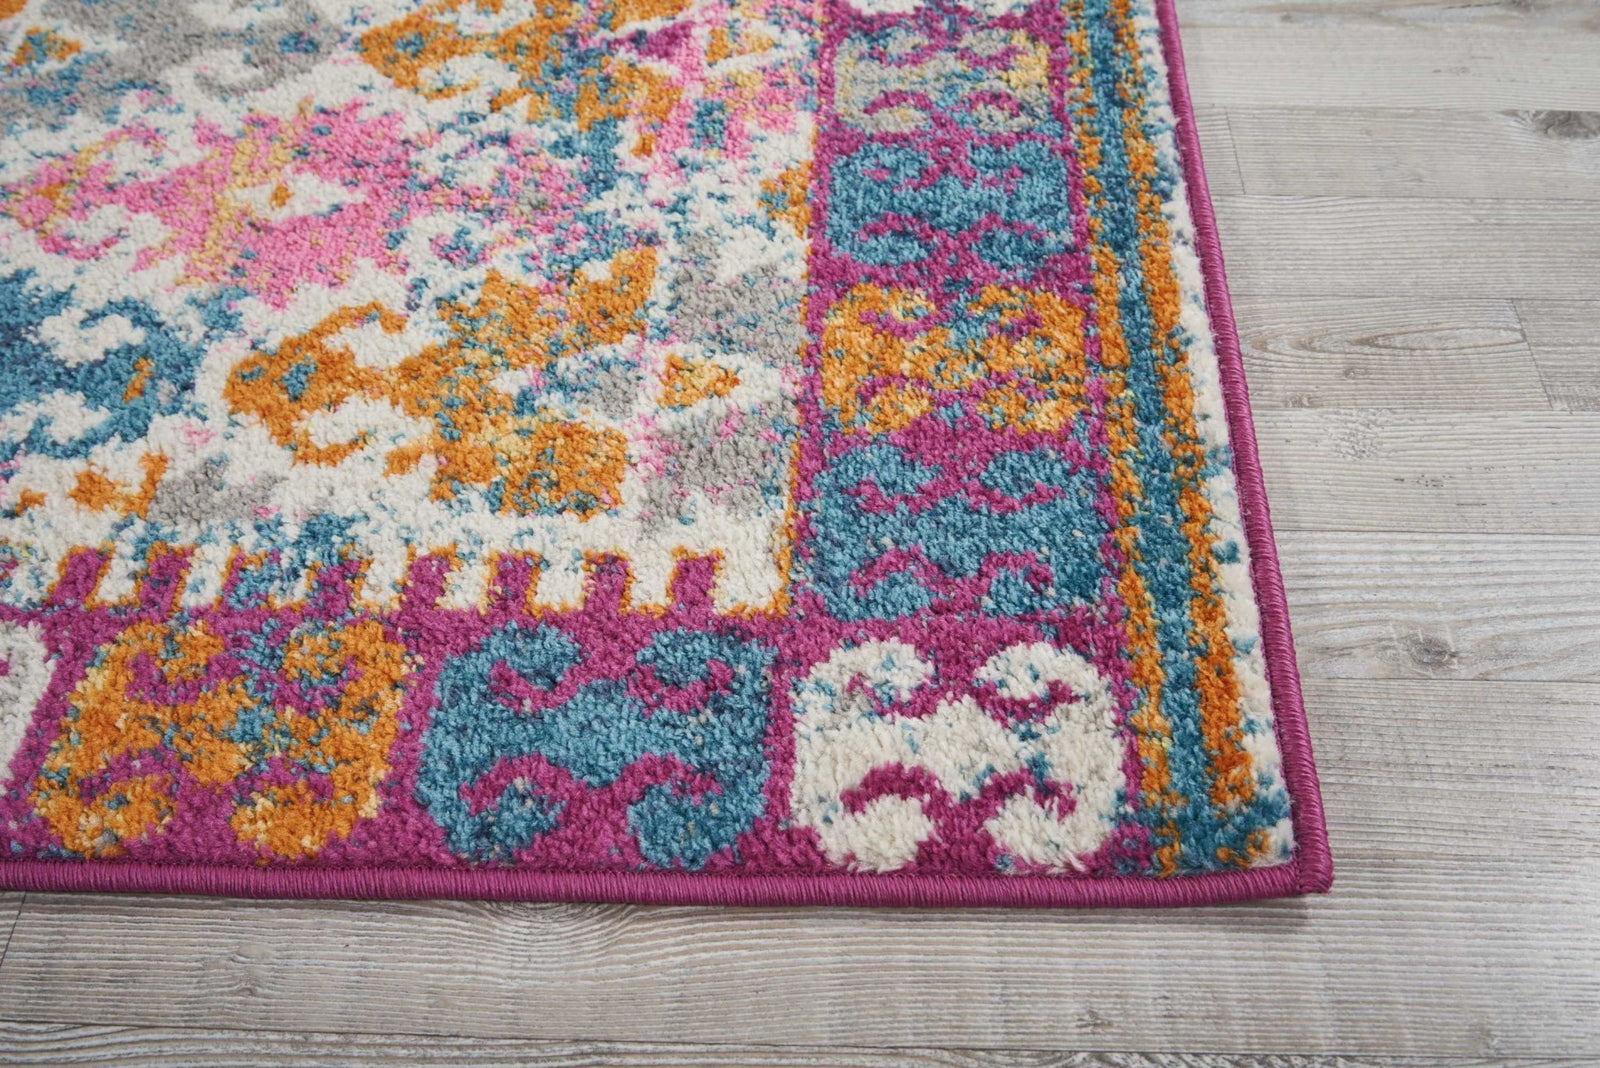 2’ X 6’ Ivory And Magenta Tribal Pattern Runner Rug